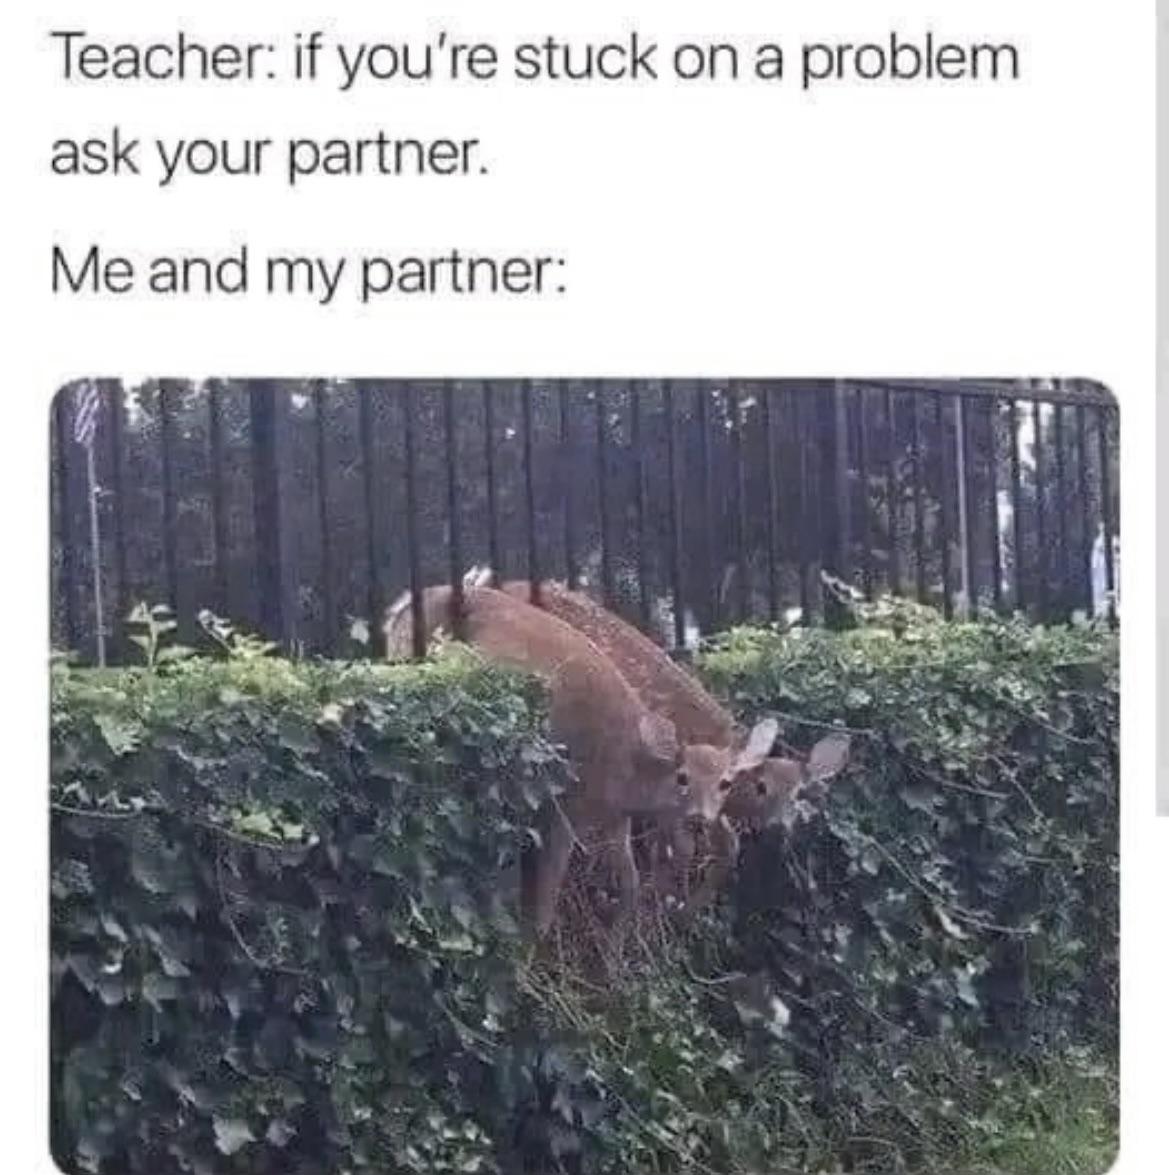 funny memes and pics - if you re stuck on a problem ask your partner - Teacher ask your partner. Me and my partner if you're stuck on a problem